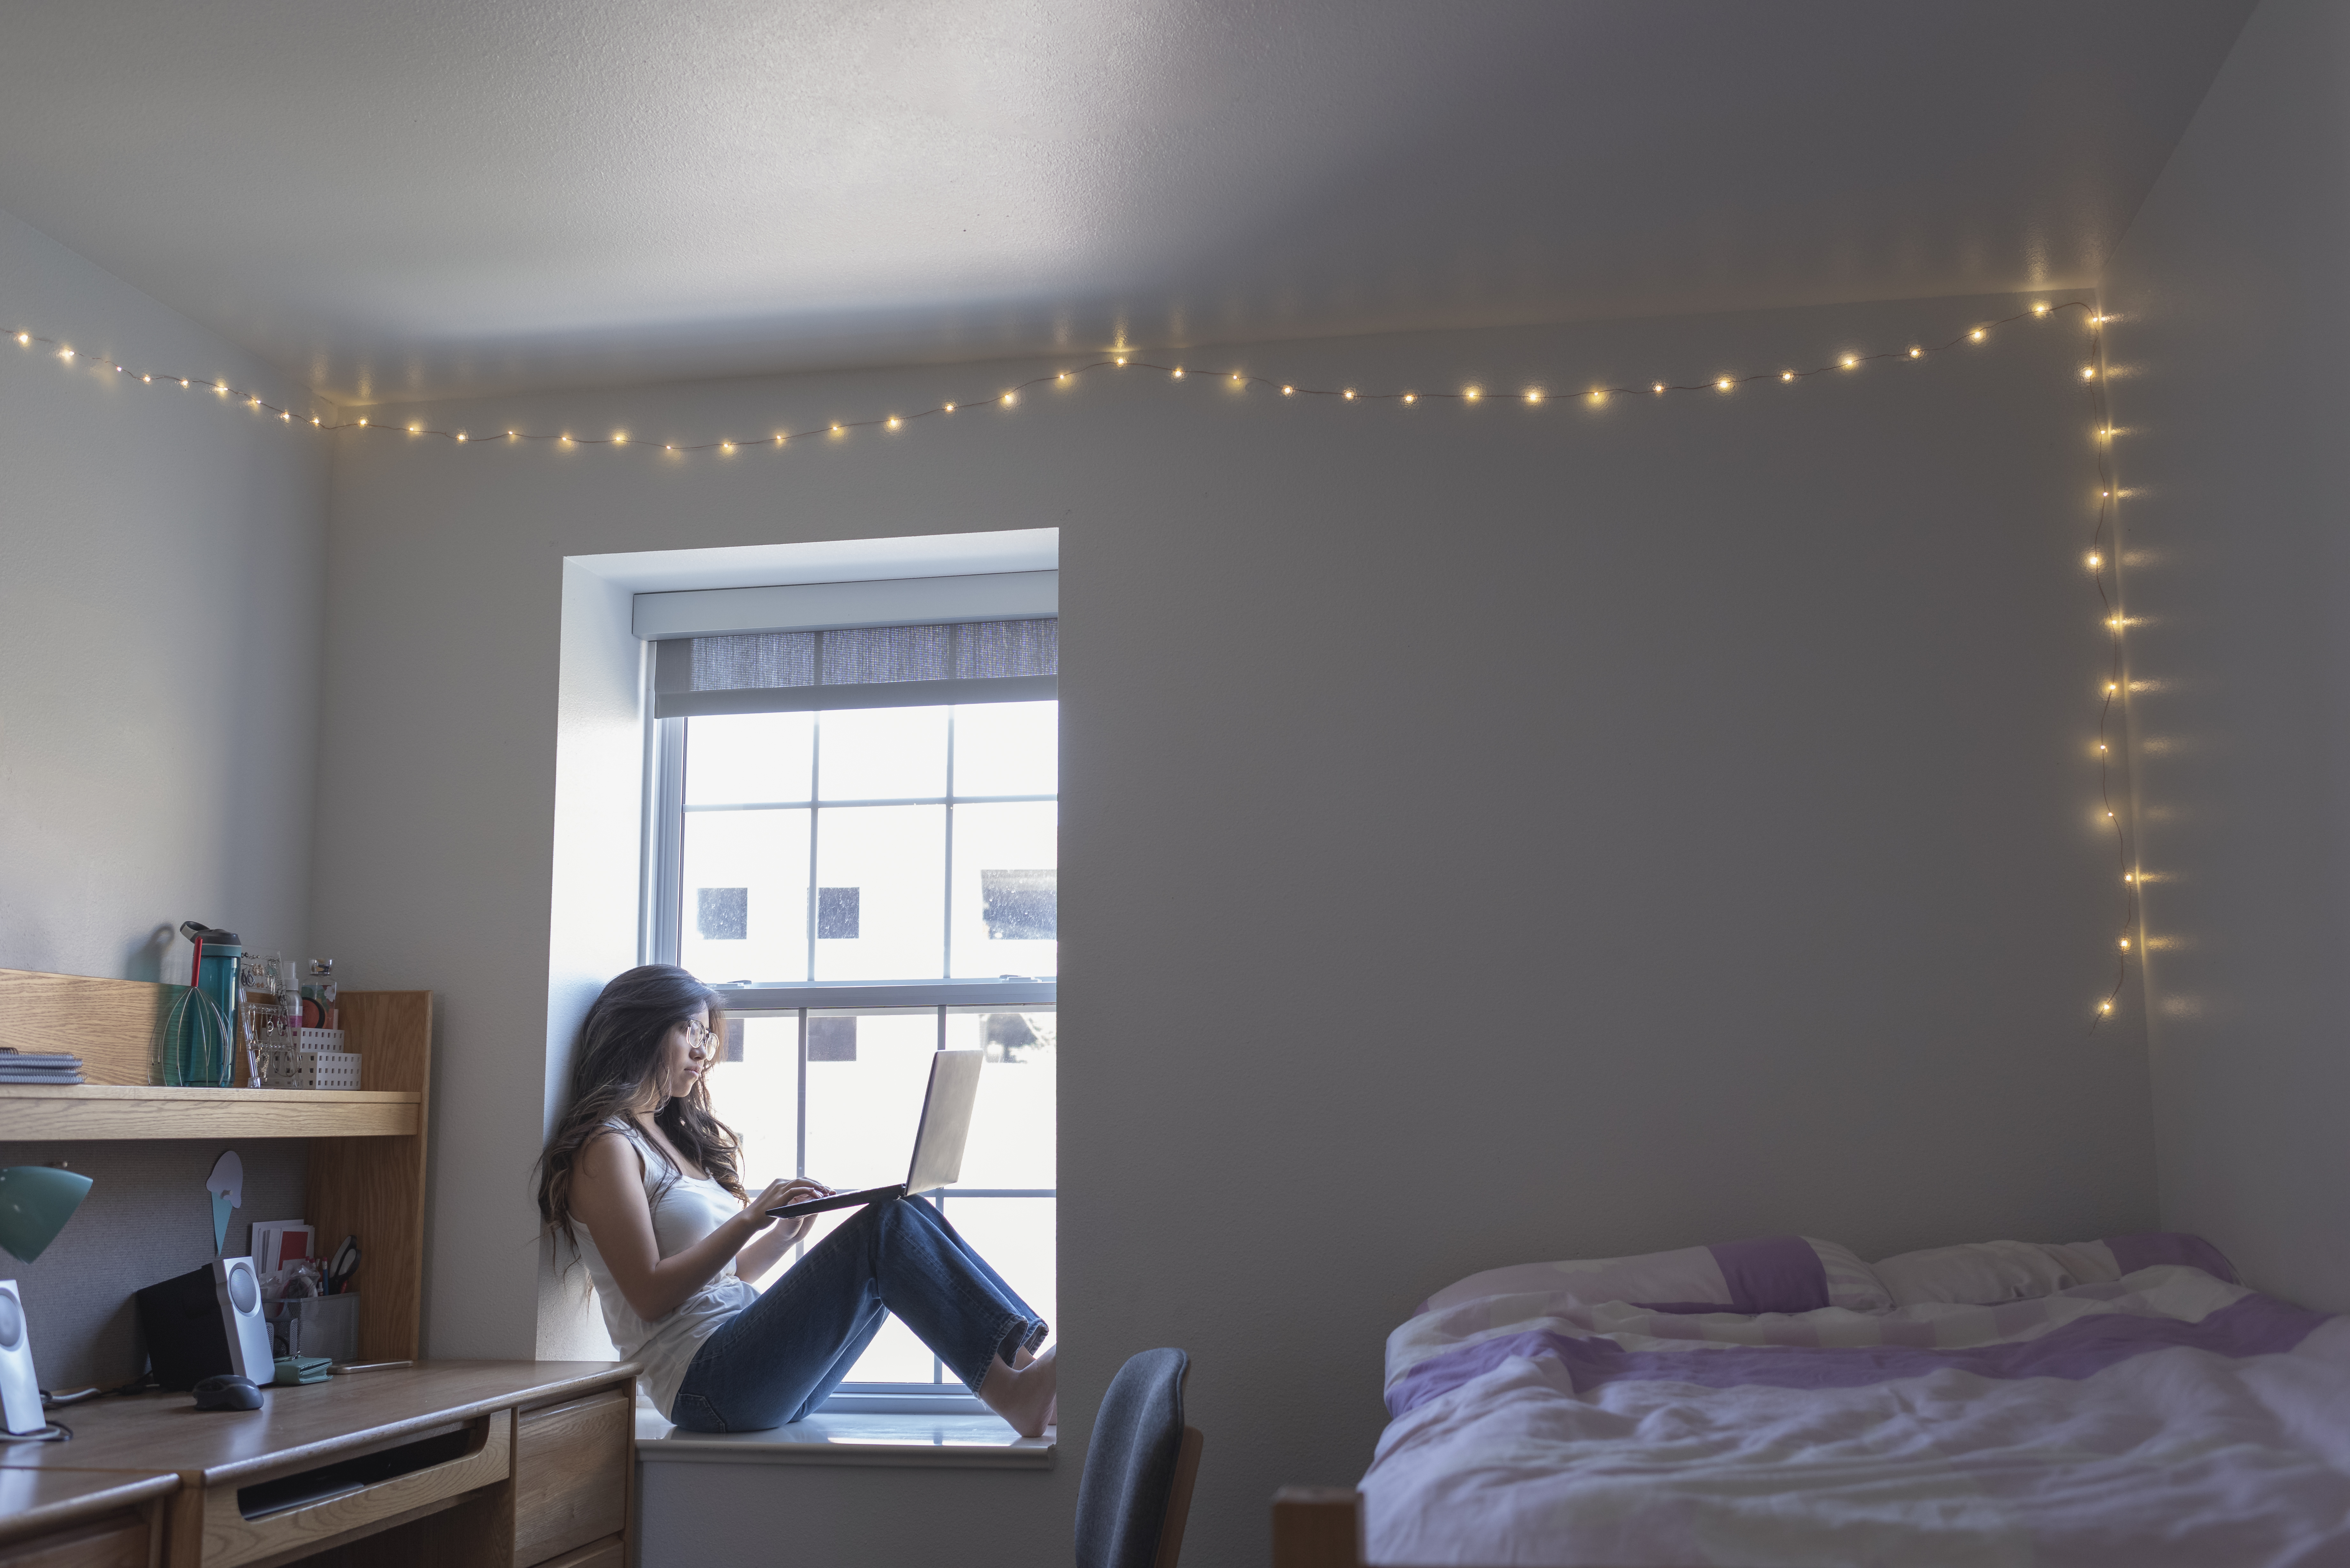 A college student in her dorm room | Source: Getty Images